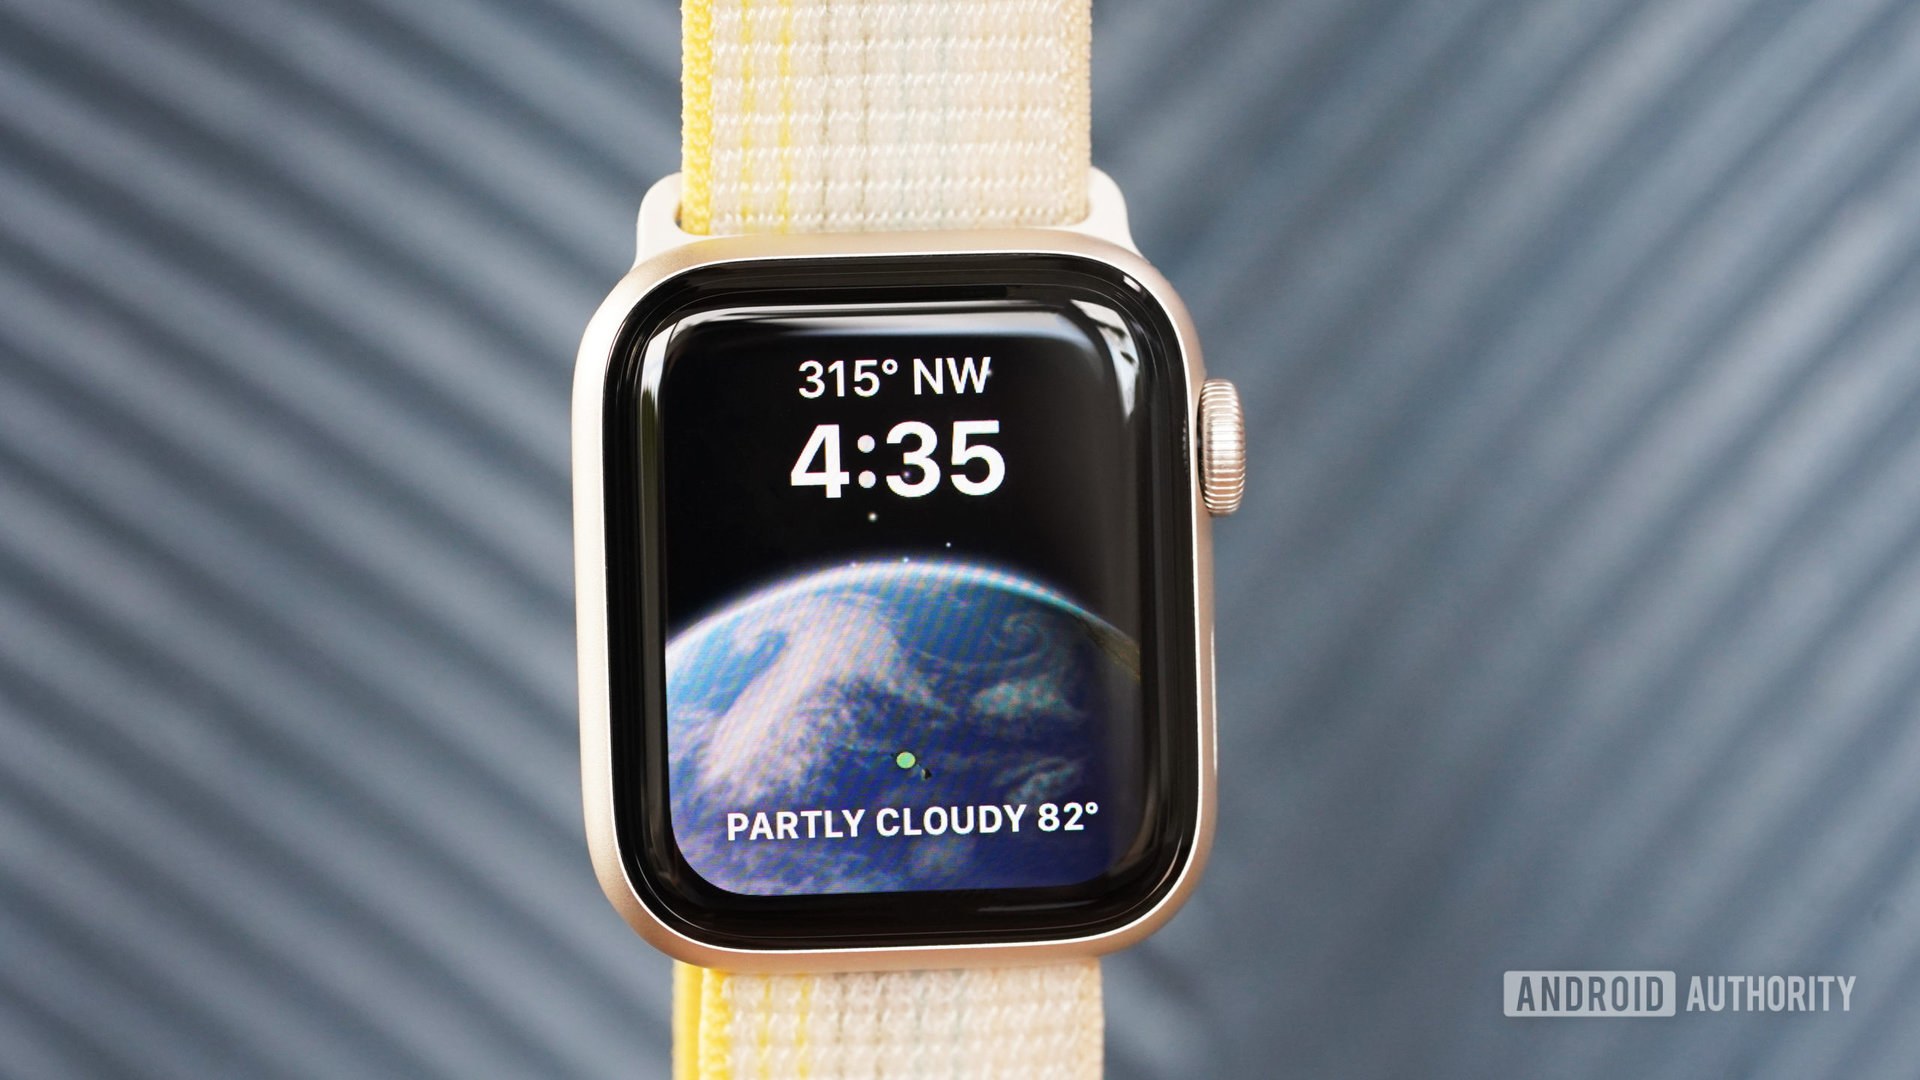 An Apple Watch SE displays the Astronomy watch face featuring compass and weather complications.